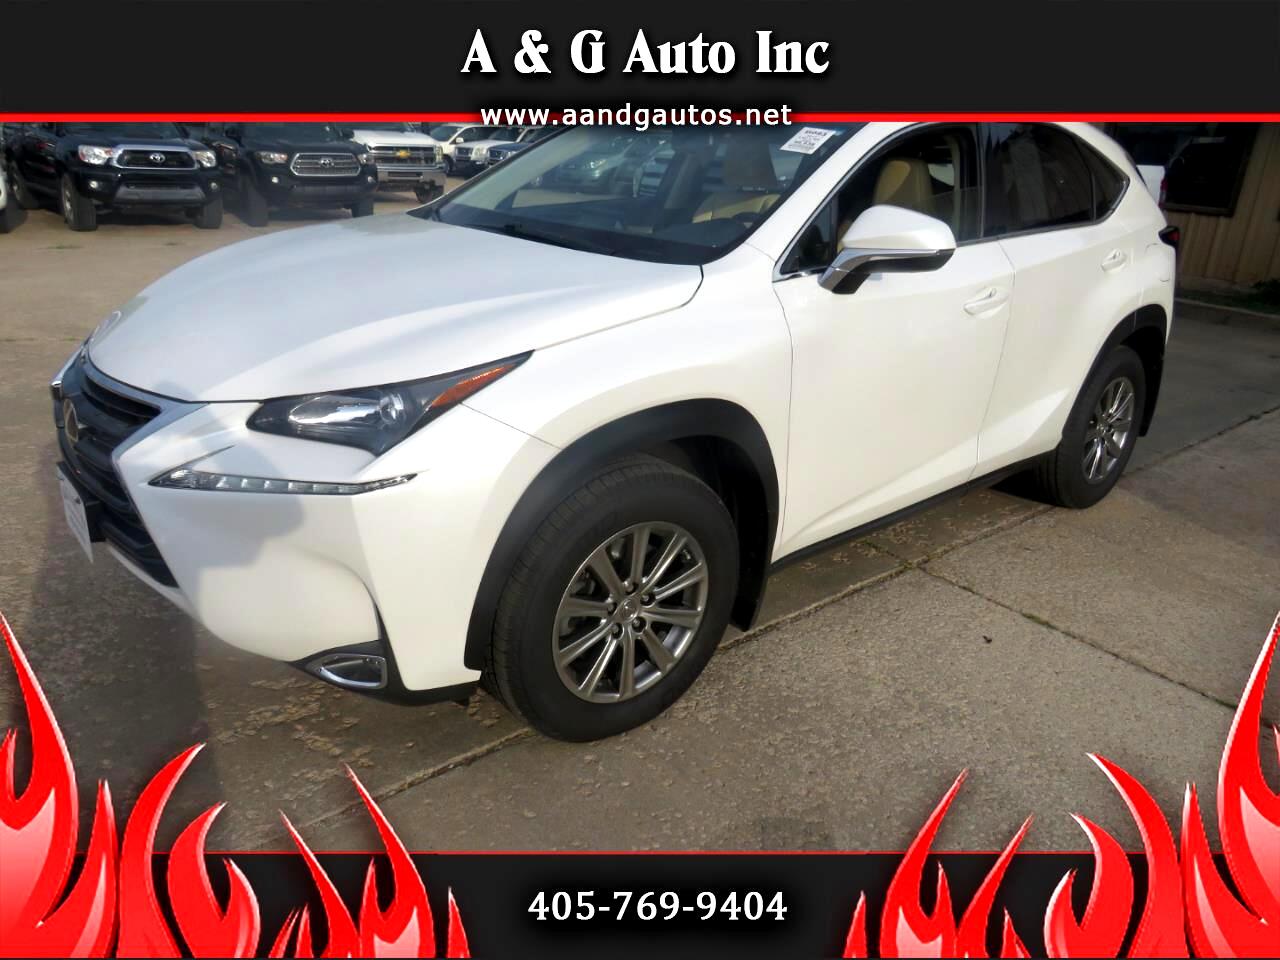 2017 Lexus NX 200t for sale in Oklahoma City OK 73141 by A & G Auto Inc